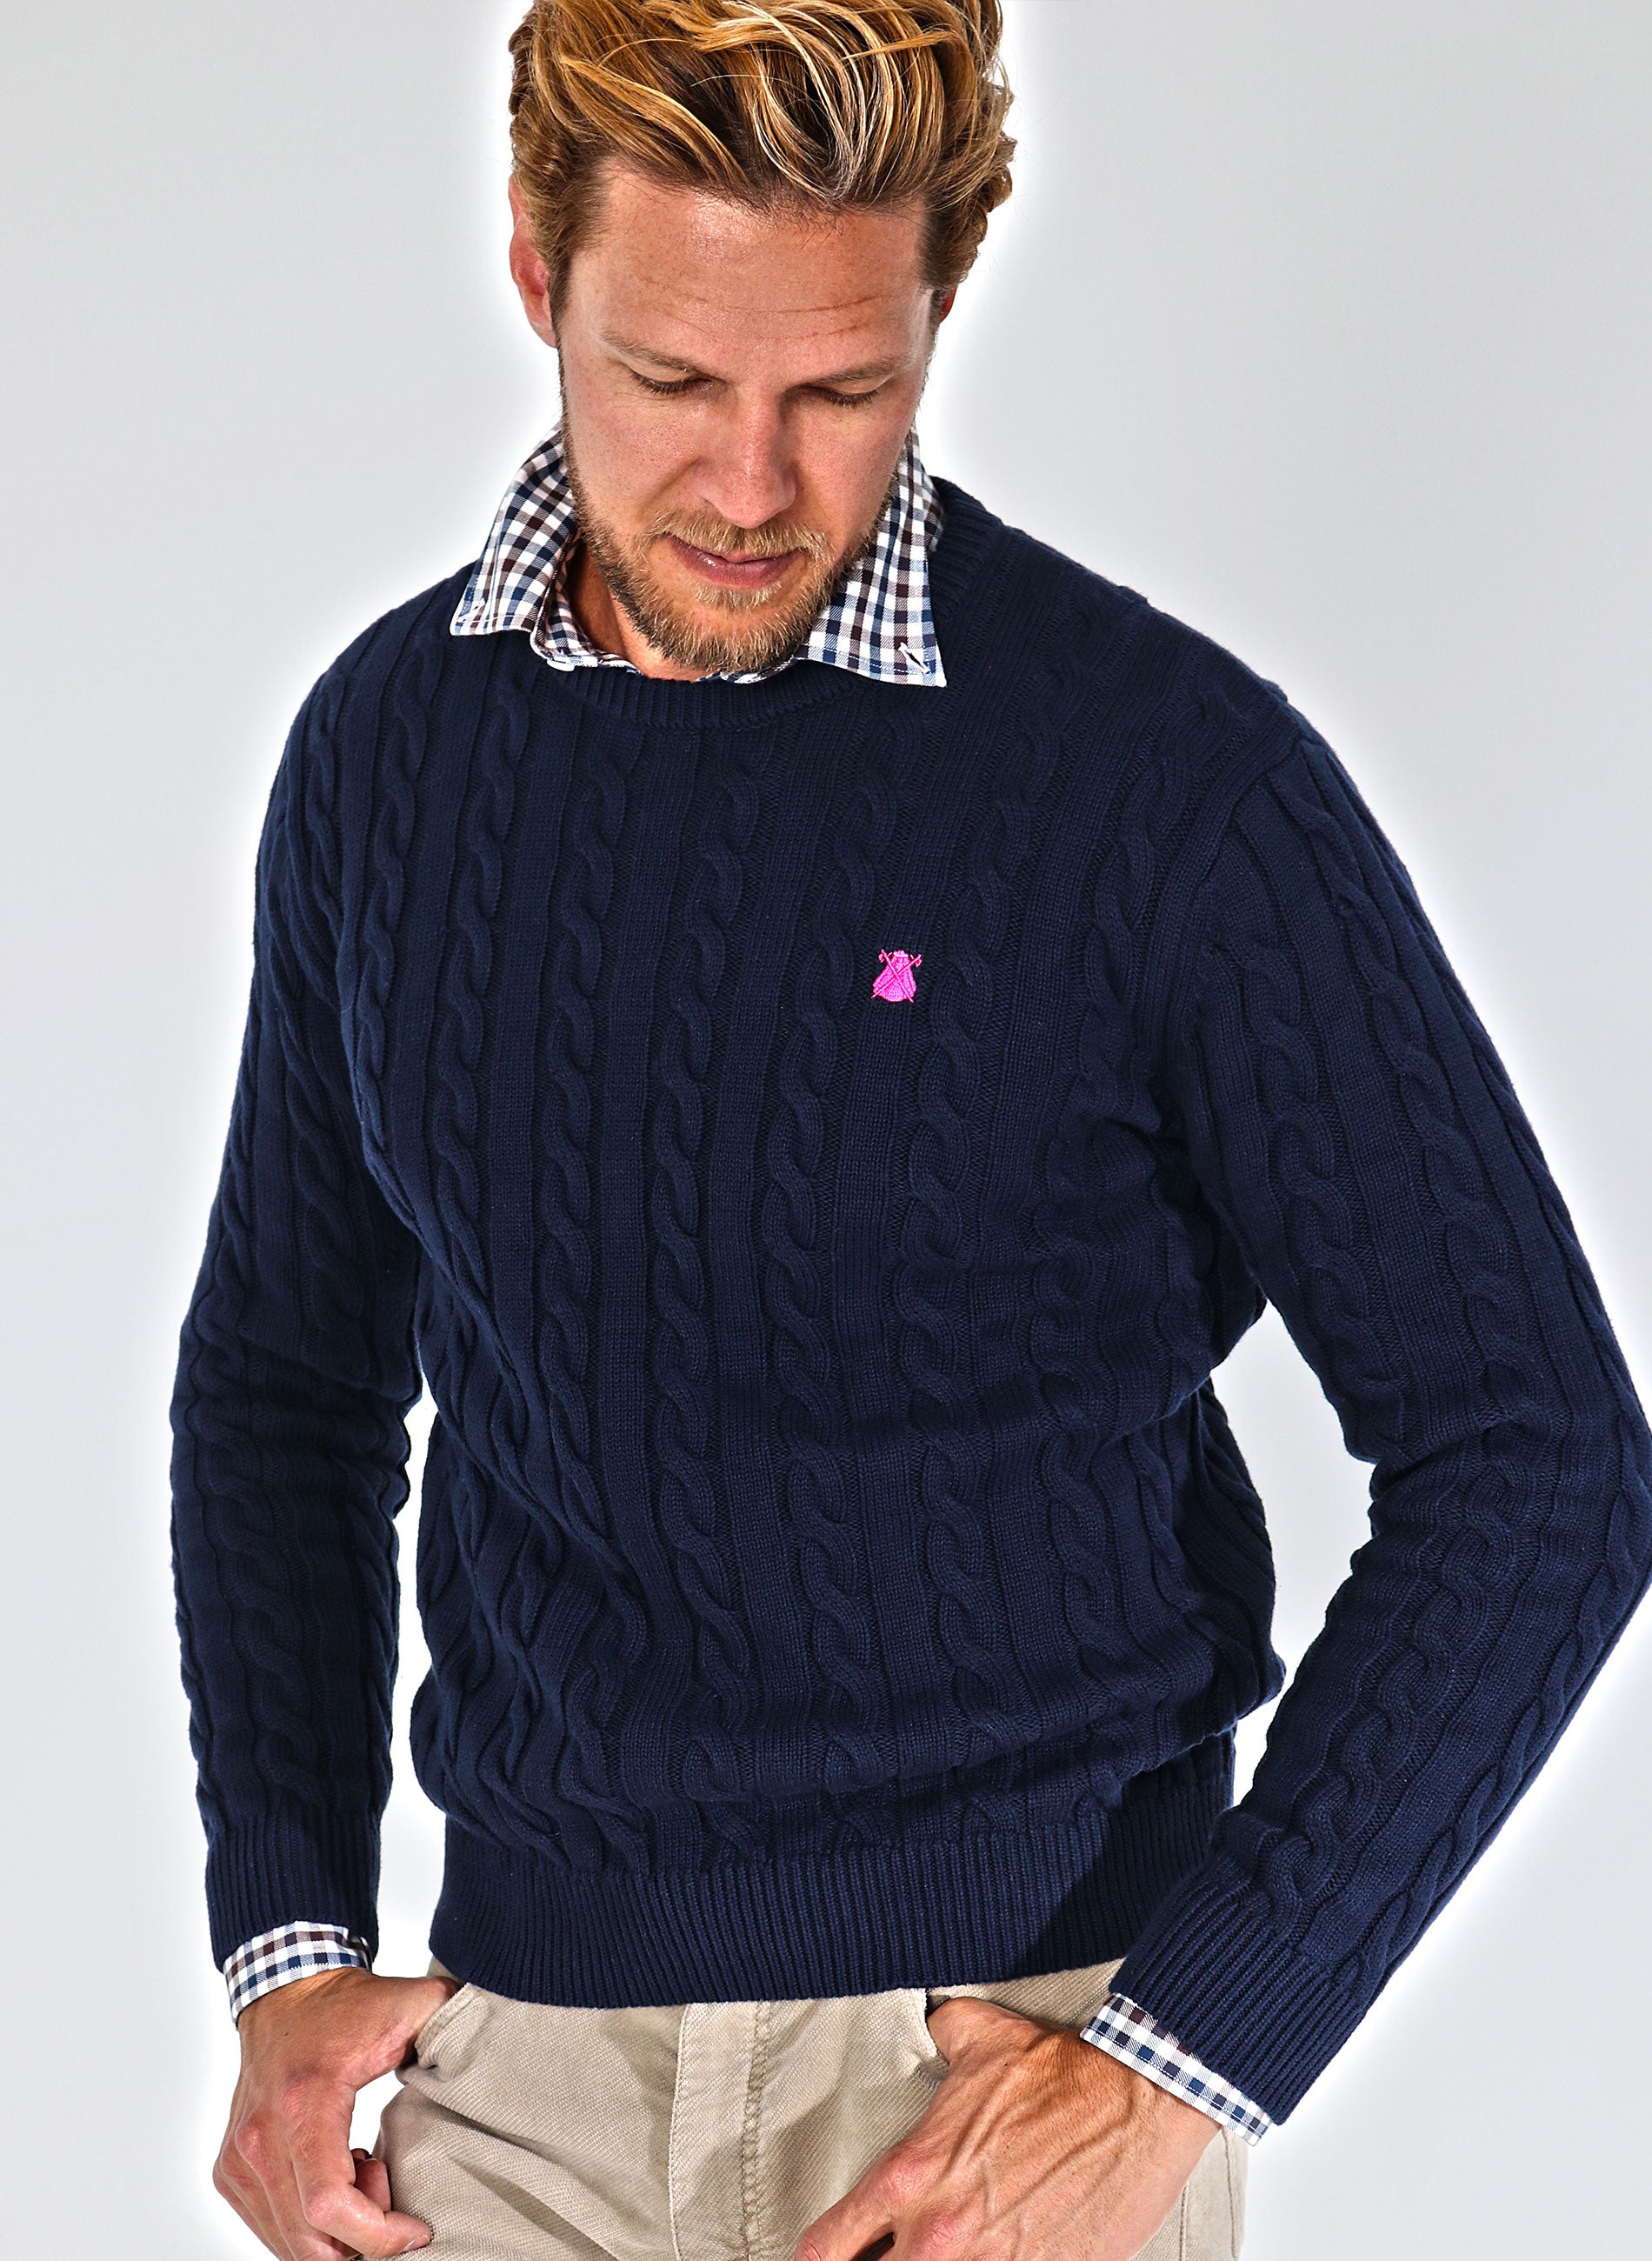 Men's Navy Blue Cable Knit Sweater